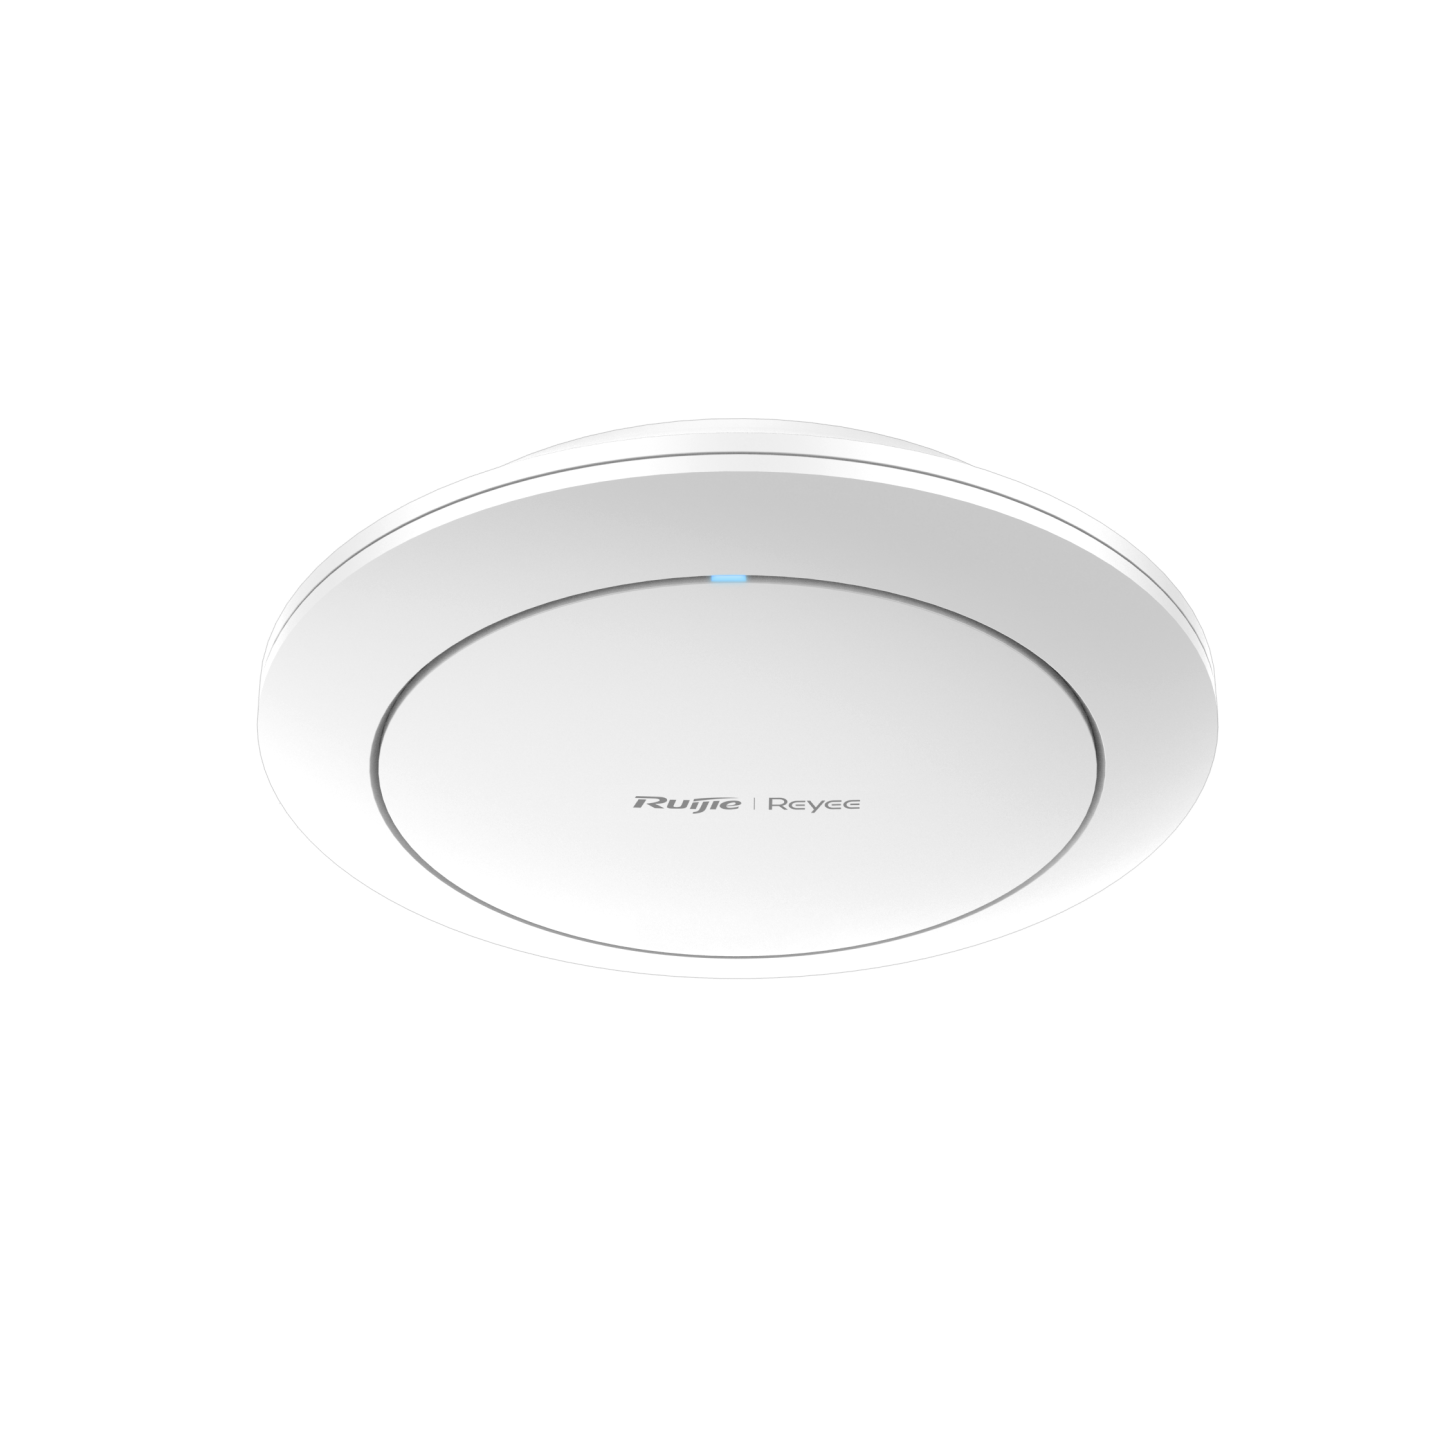 RG-RAP2266, Reyee Wi-Fi 6 AX3000 Indoor Ceiling-Mount Access Point